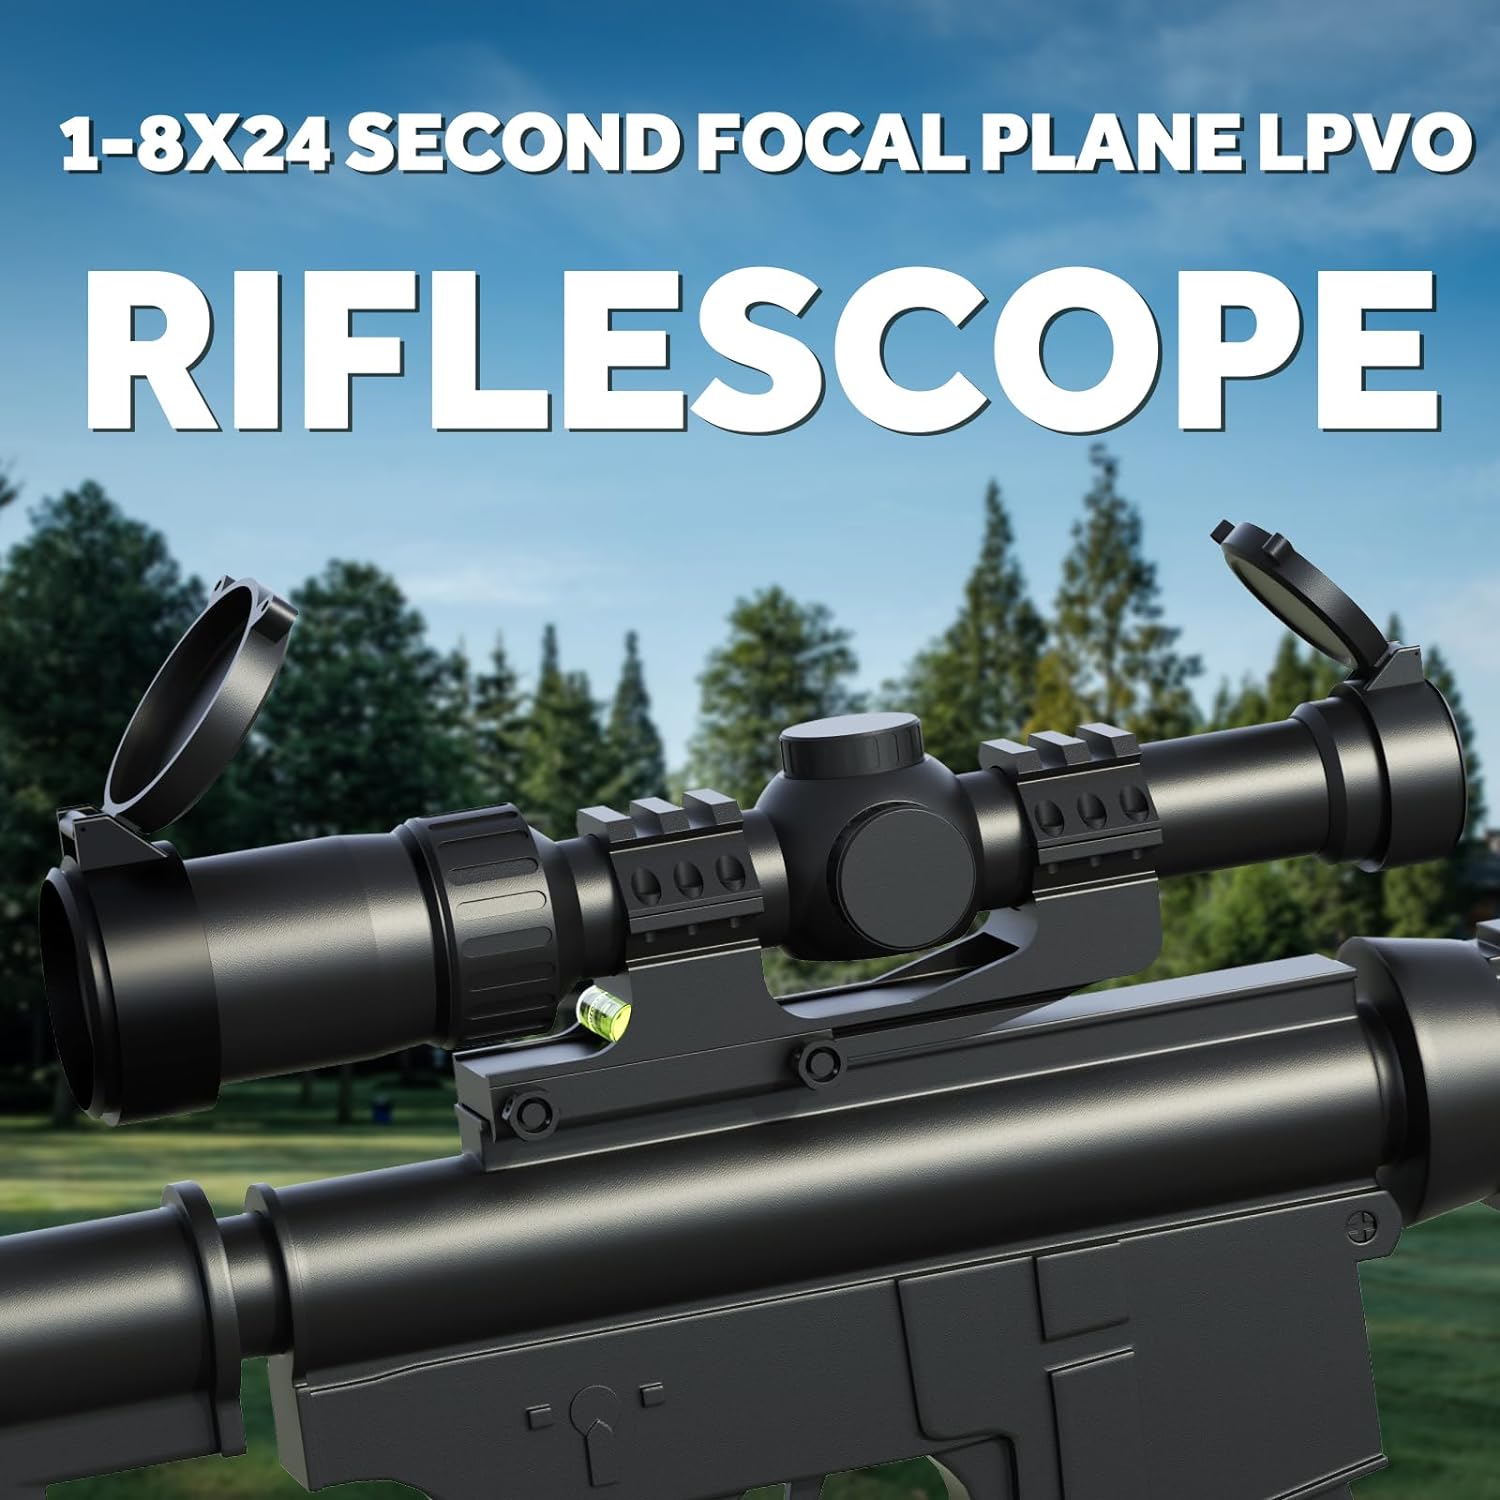 FHYRGF 1-8x24 Rifle Scope SFP Tactical Optics LPVO, Illuminated Reticle Hunting Scope with Cantilever Mount - FHYRGF 1-8x24 Rifle Scope Review